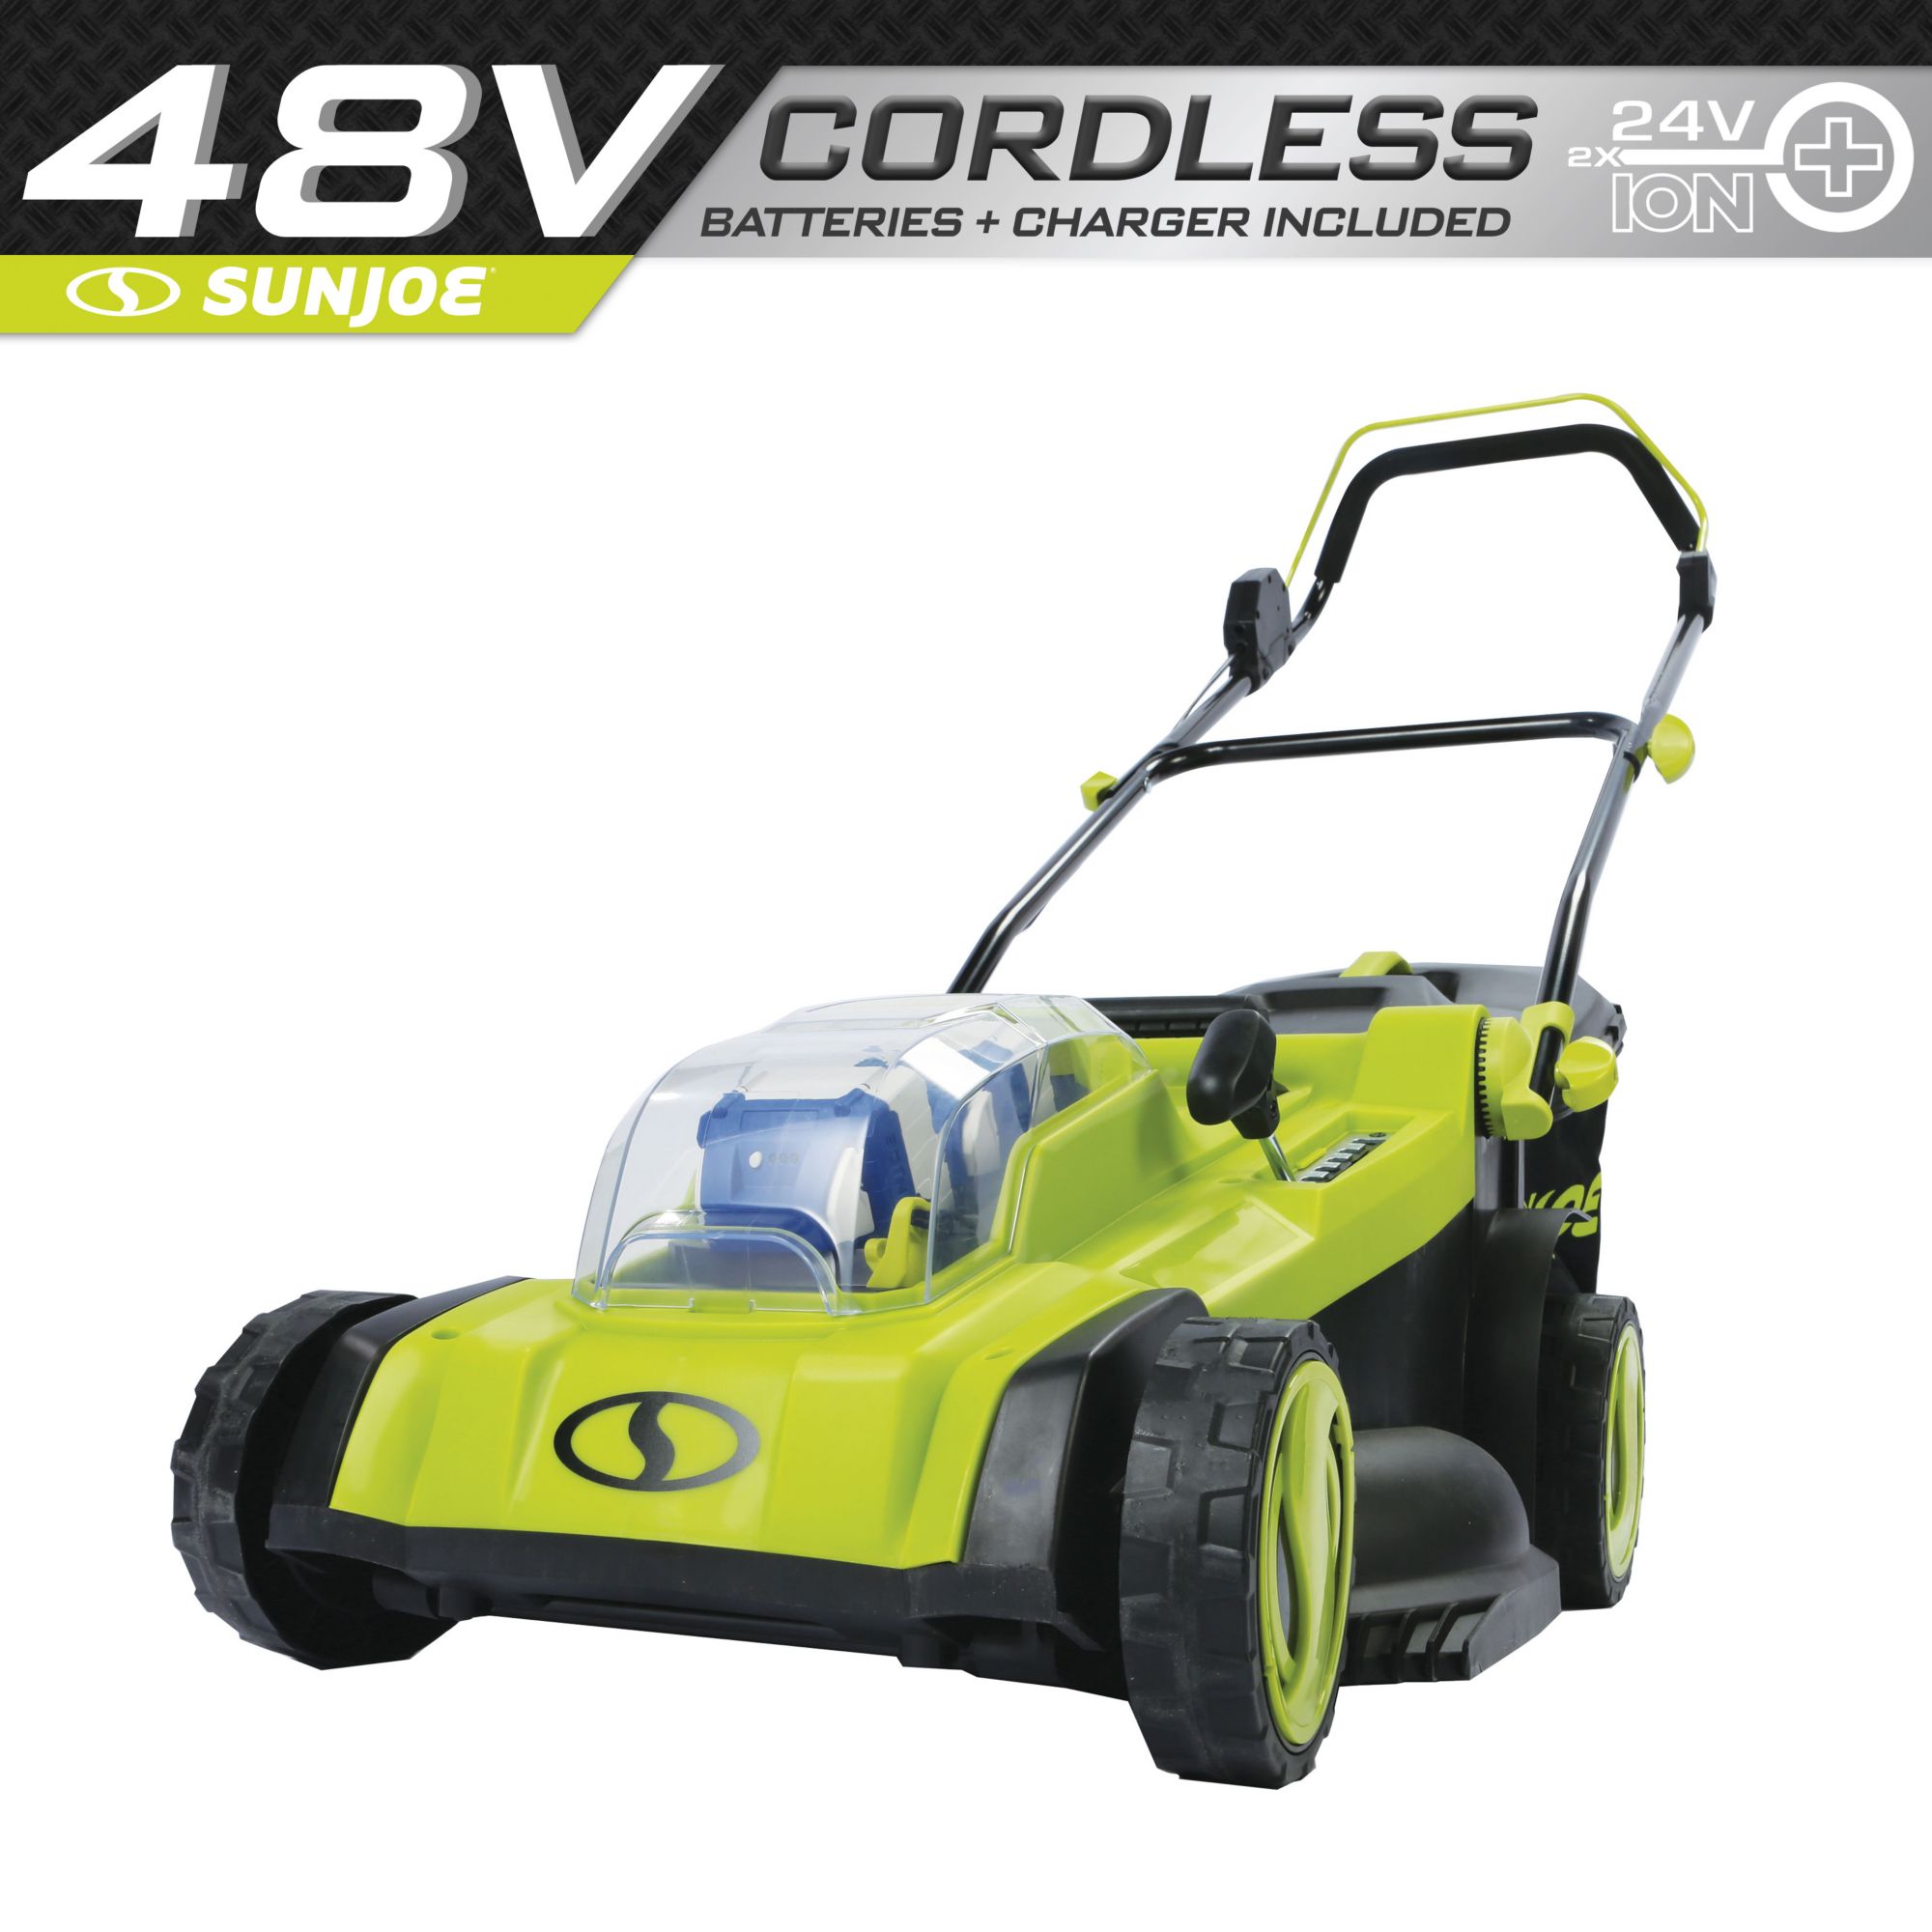 Sun Joe iON16LM 40 V 16-inch Cordless Lawn Mower with Brushless Motor